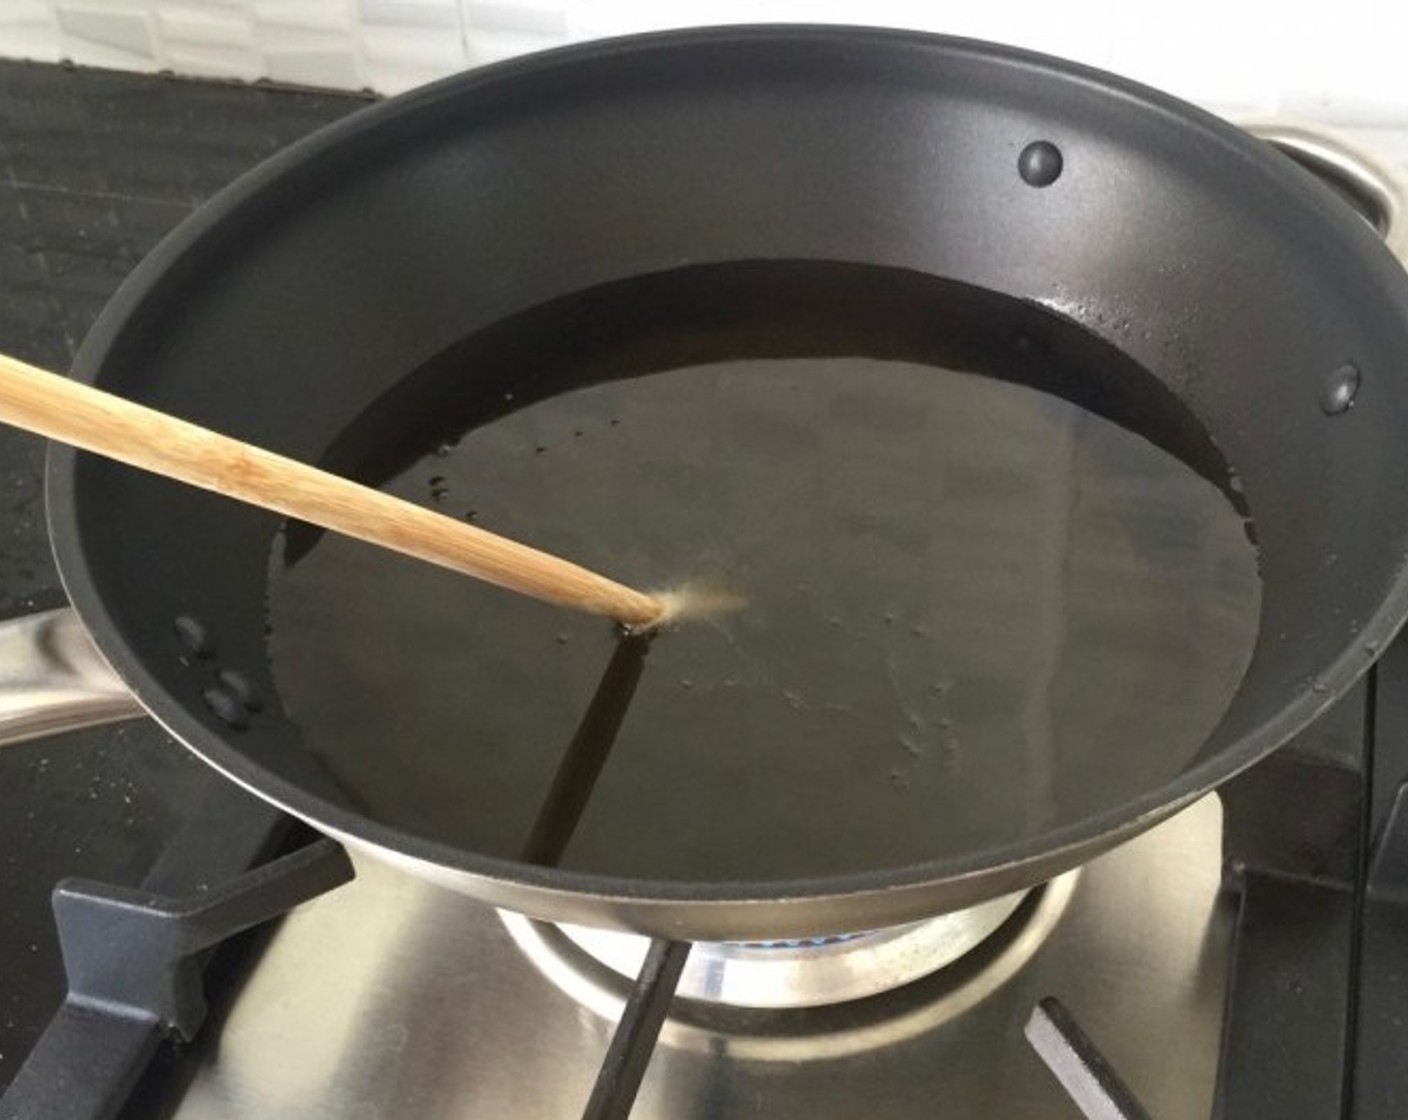 step 15 In a large pot or pan, fill with about 2 inches of Vegetable Oil (as needed). Heat until hot and bubbles appear at the tip when a wooden chopstick is dipped into the oil.